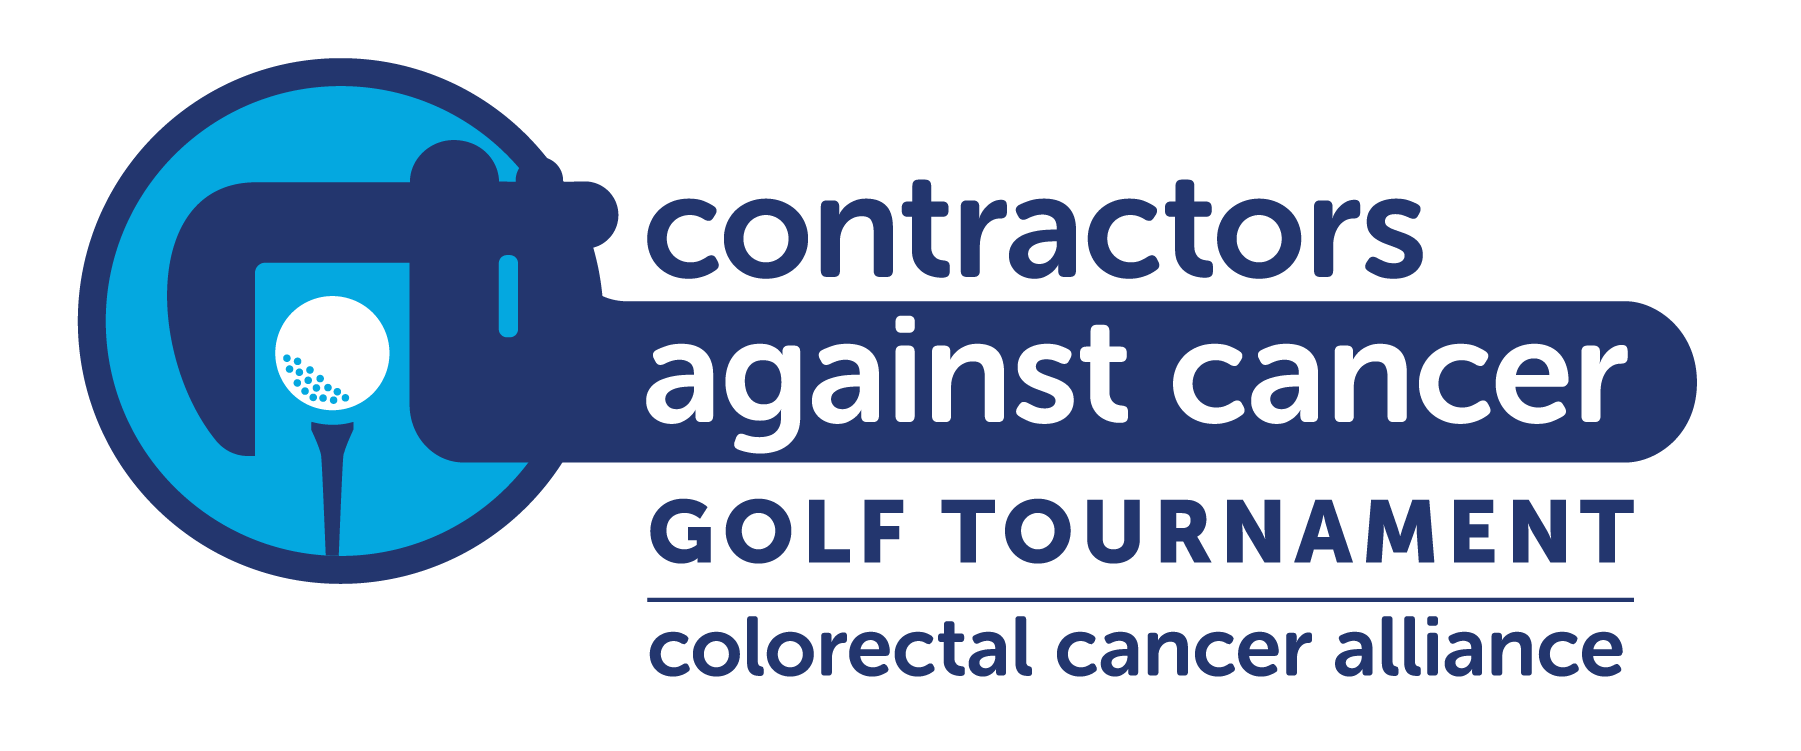 Contractors Against Cancer